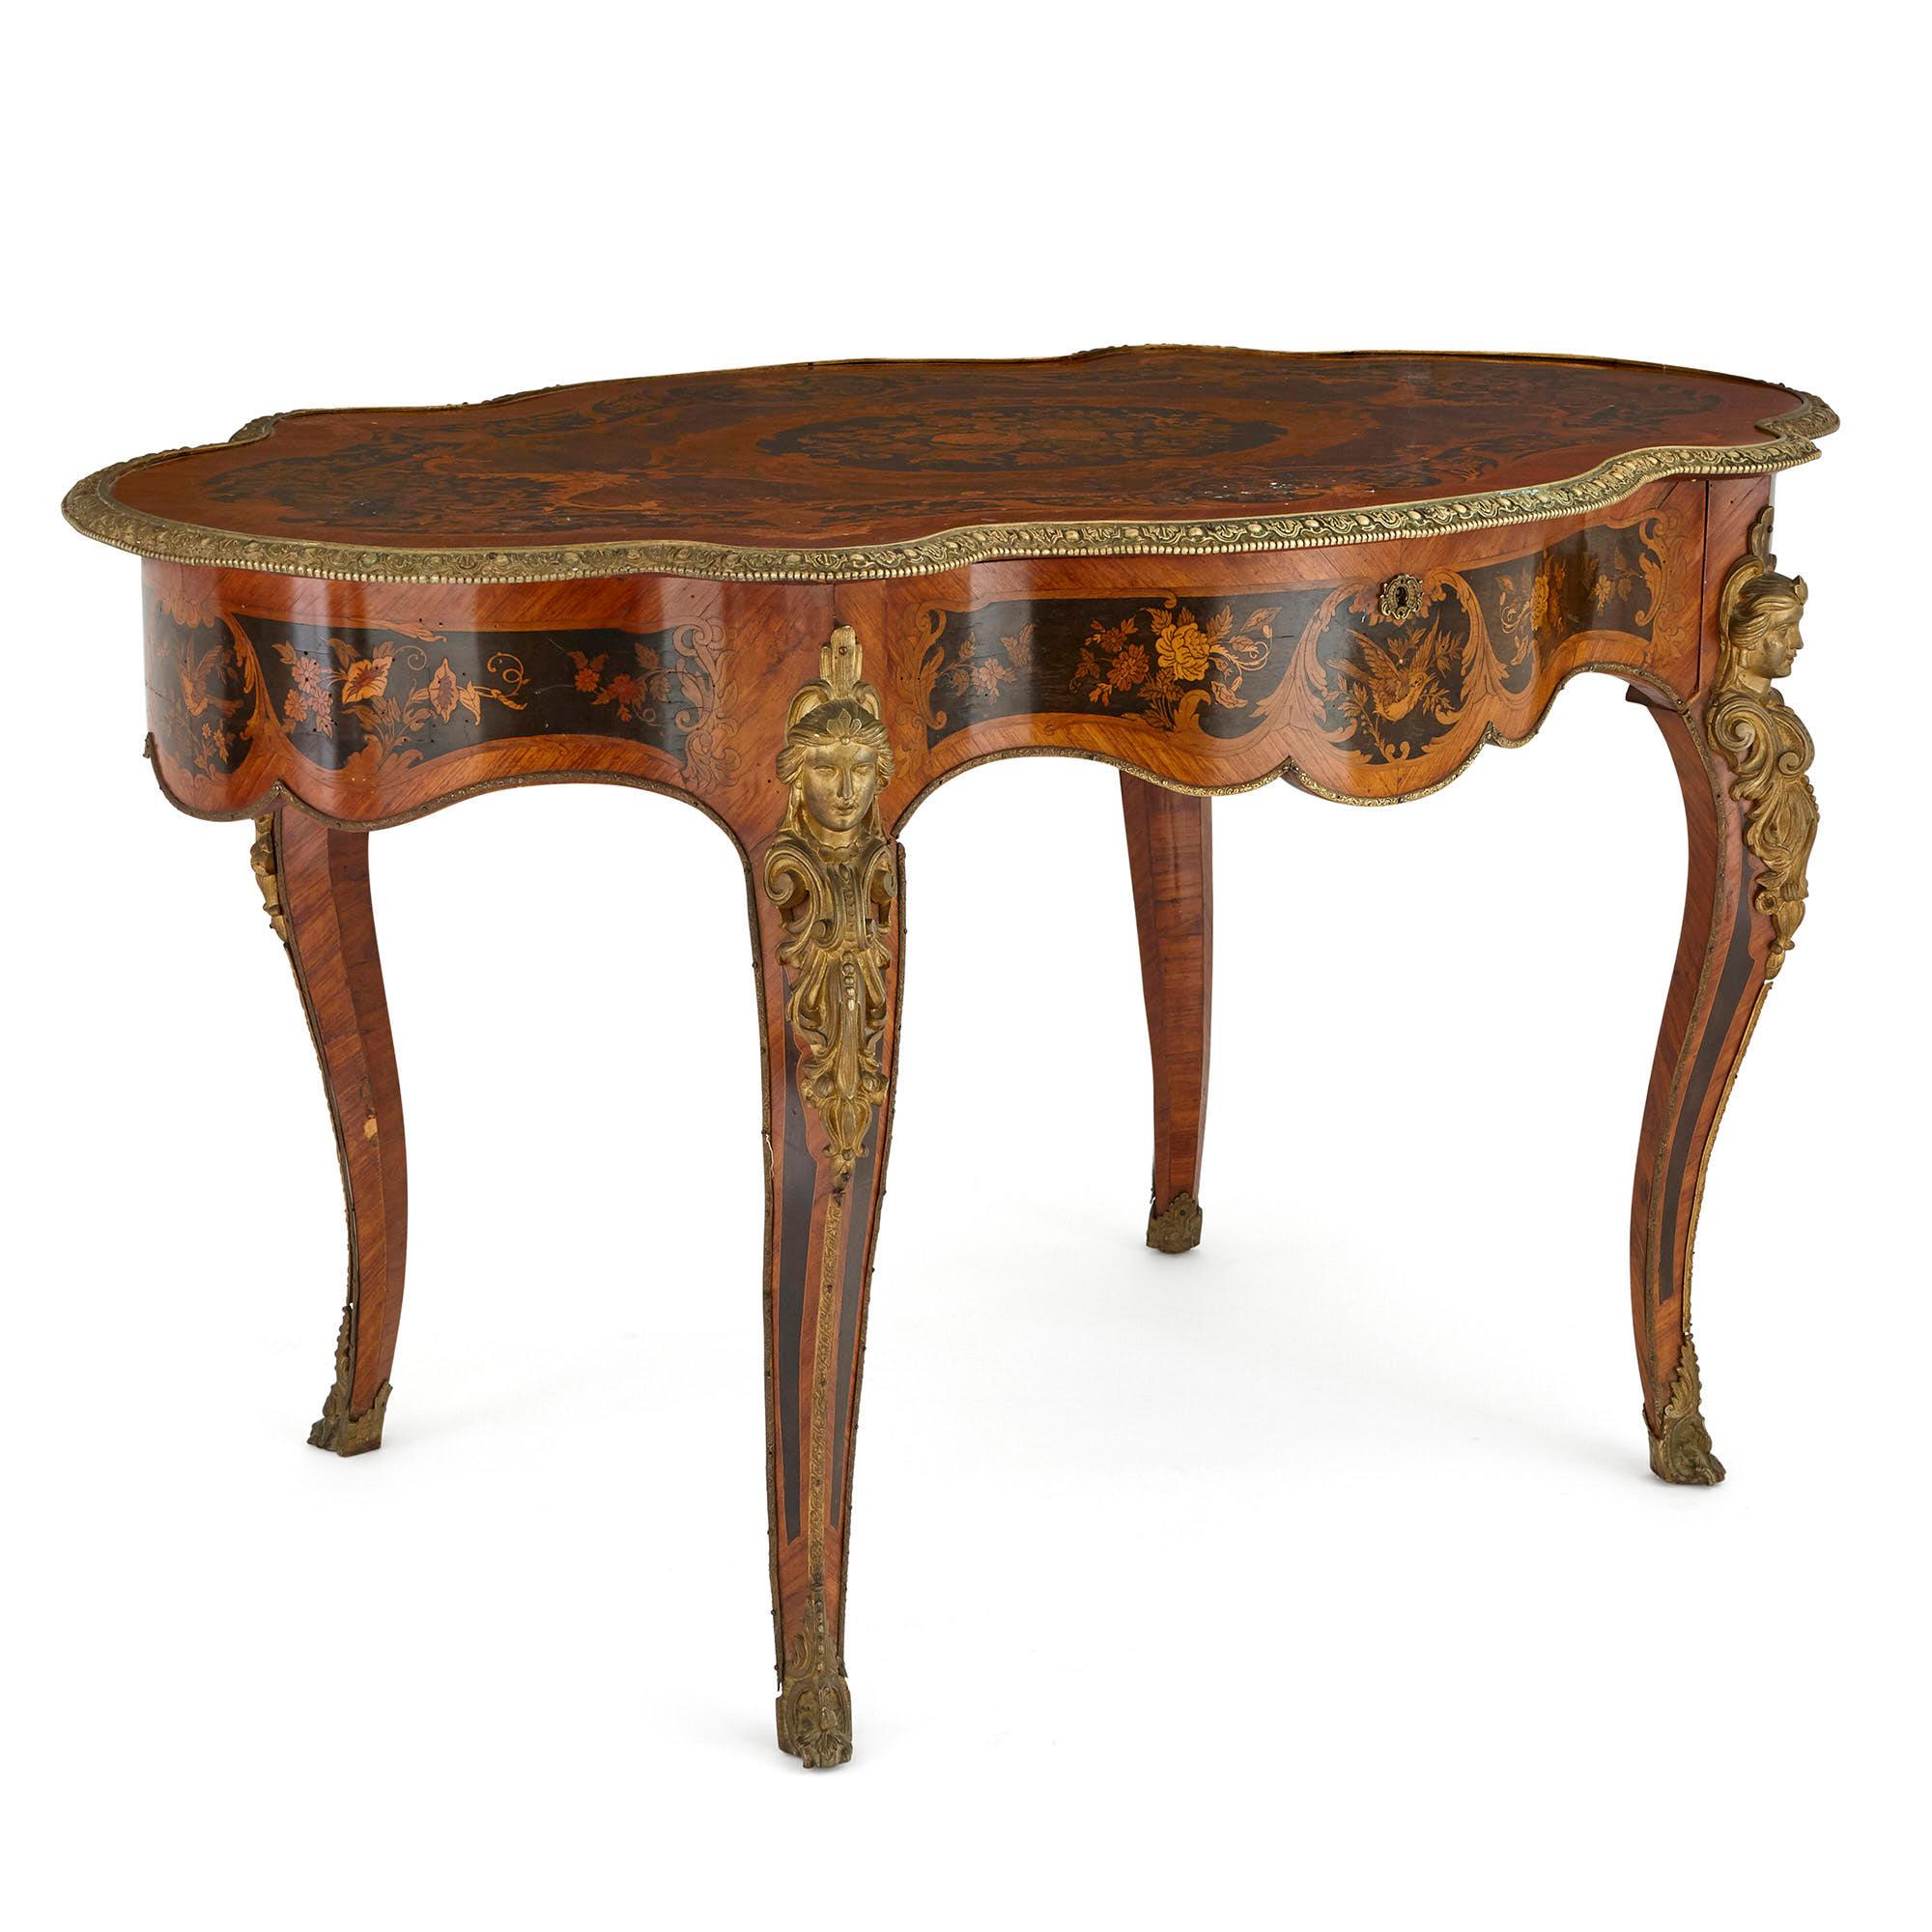 This table is an exquisite piece of French antique furniture. The table is covered with beautiful marquetry work and finely-cast gilt bronze (ormolu) mounts. 

The table features a shaped oval top which is decorated with bands of pattern, created